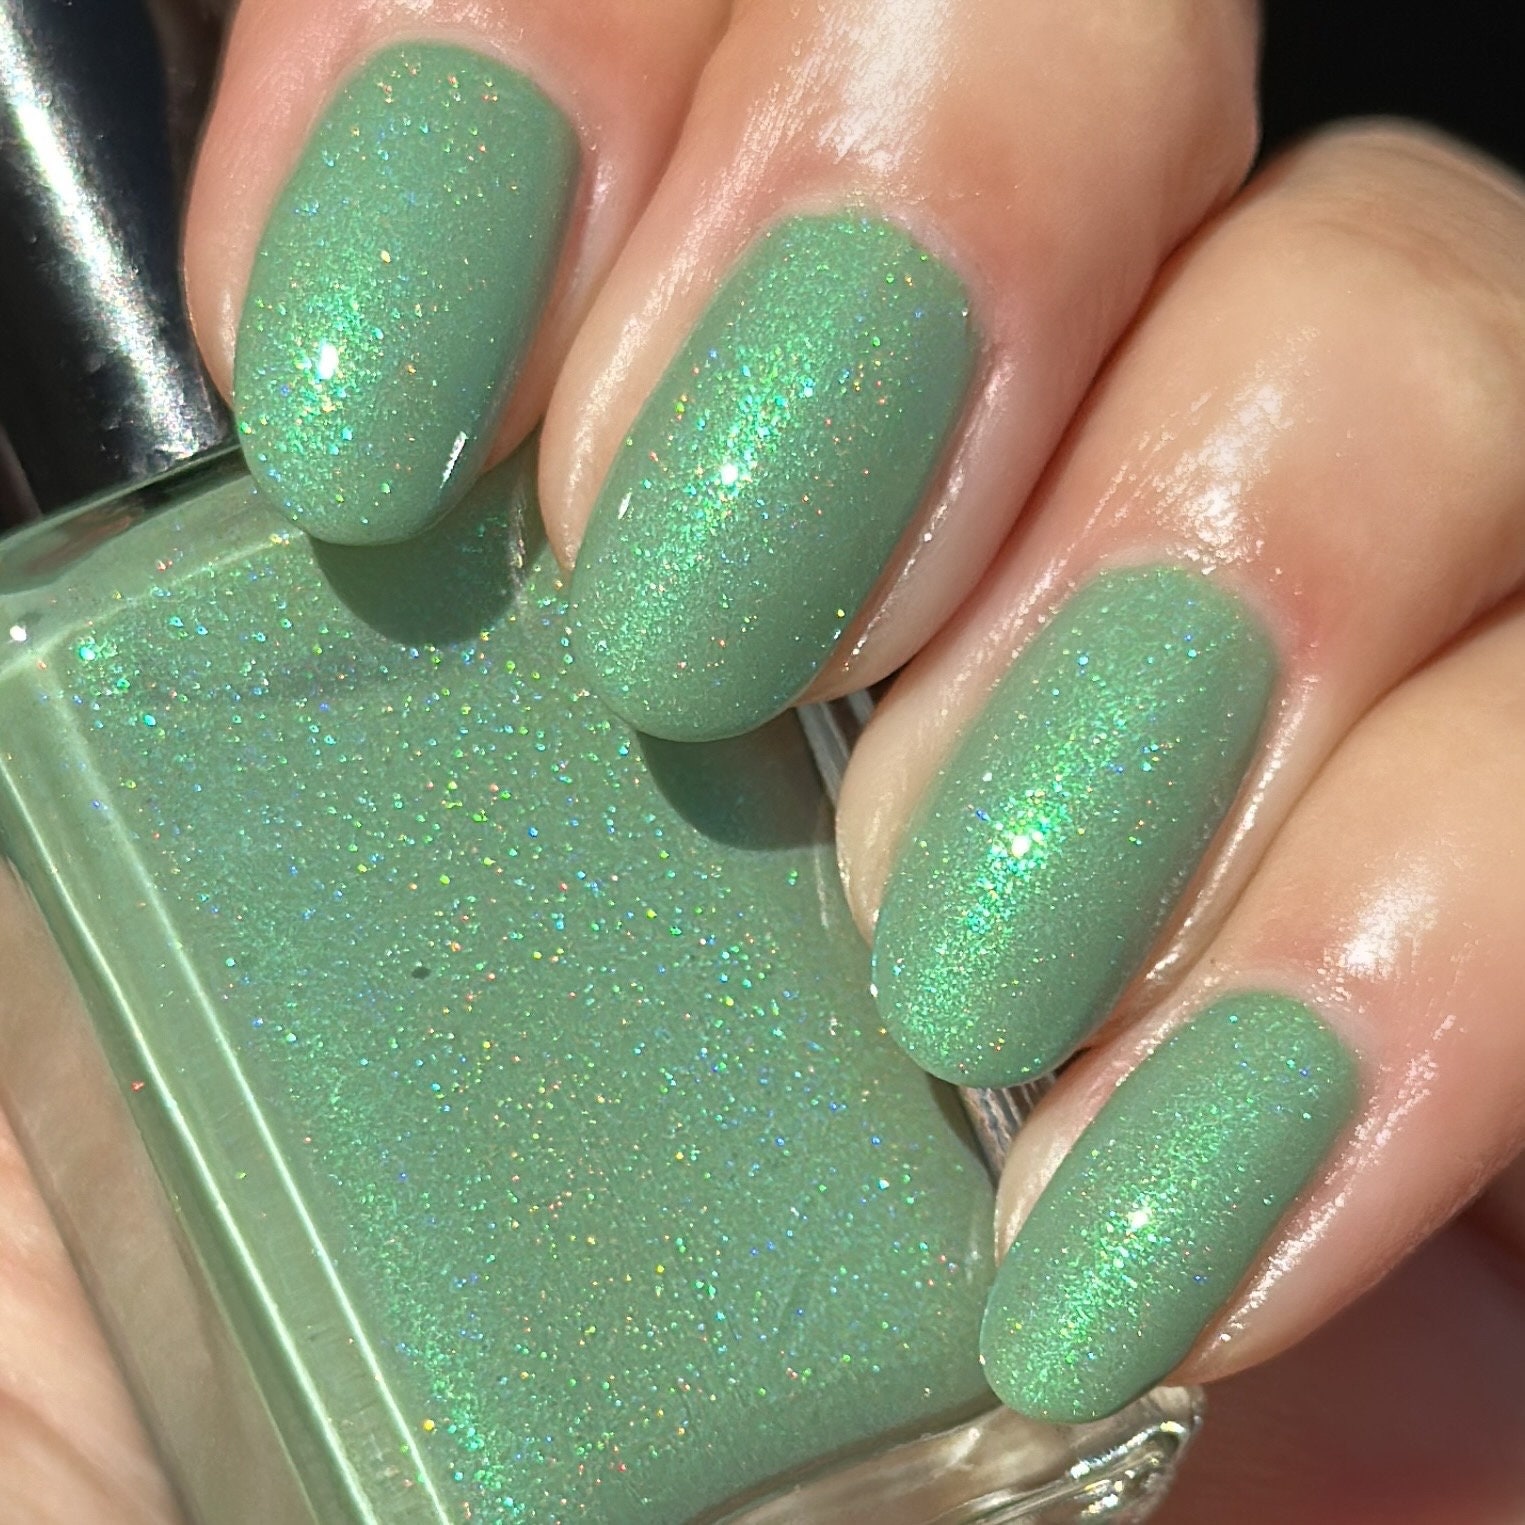 Seafoam Green Is The Nail Color Trend You Need To Try Before Summer Ends